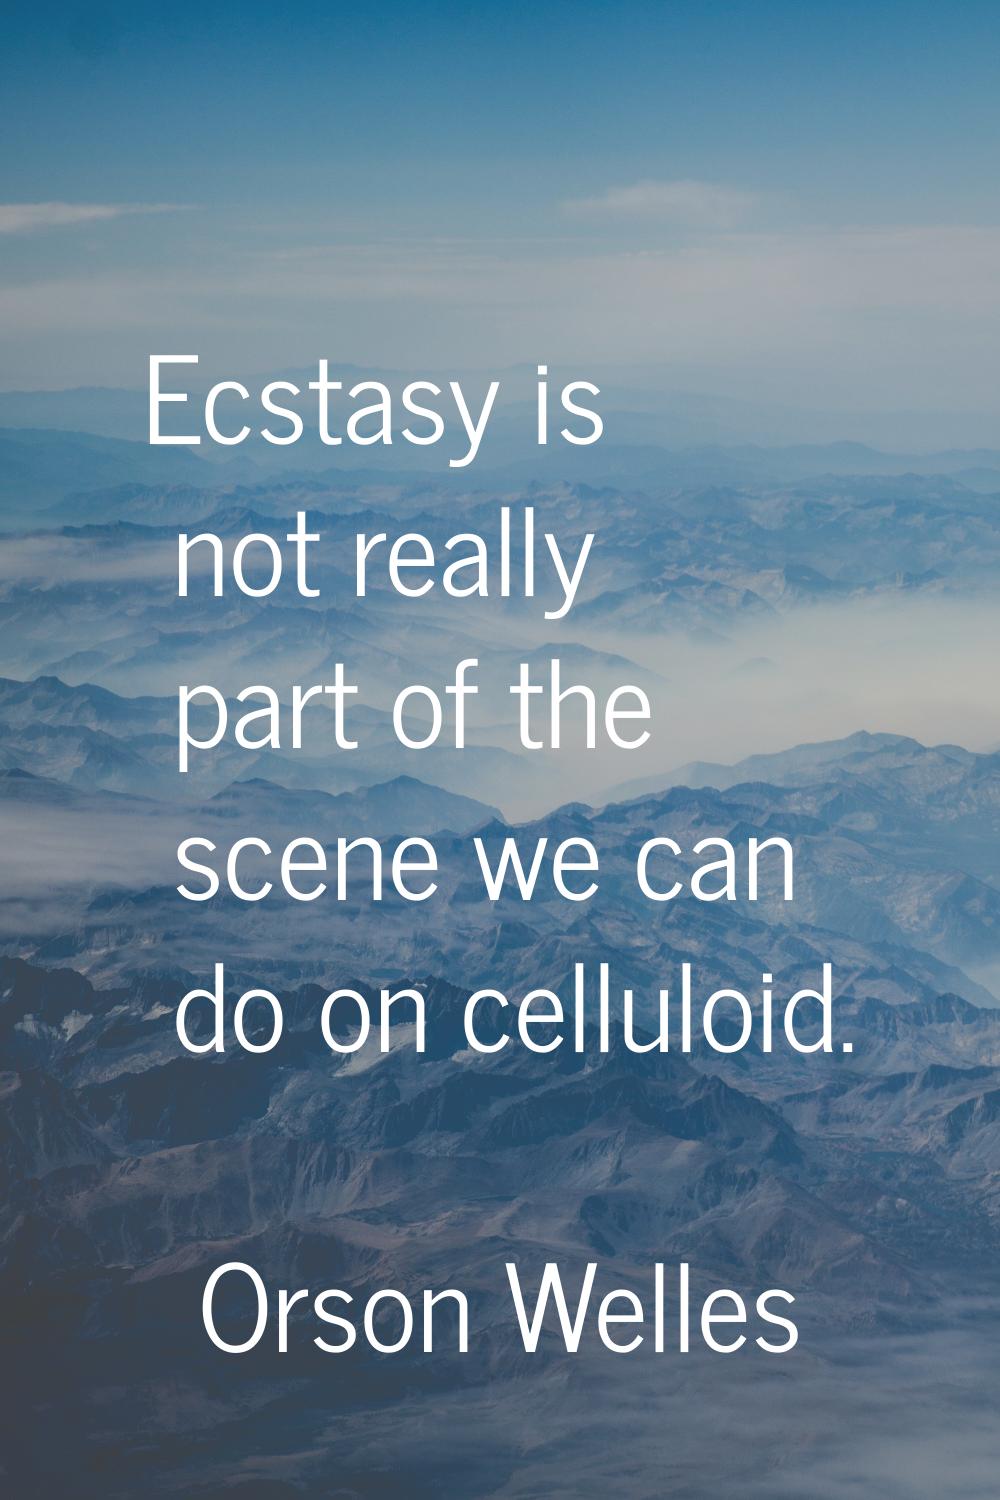 Ecstasy is not really part of the scene we can do on celluloid.